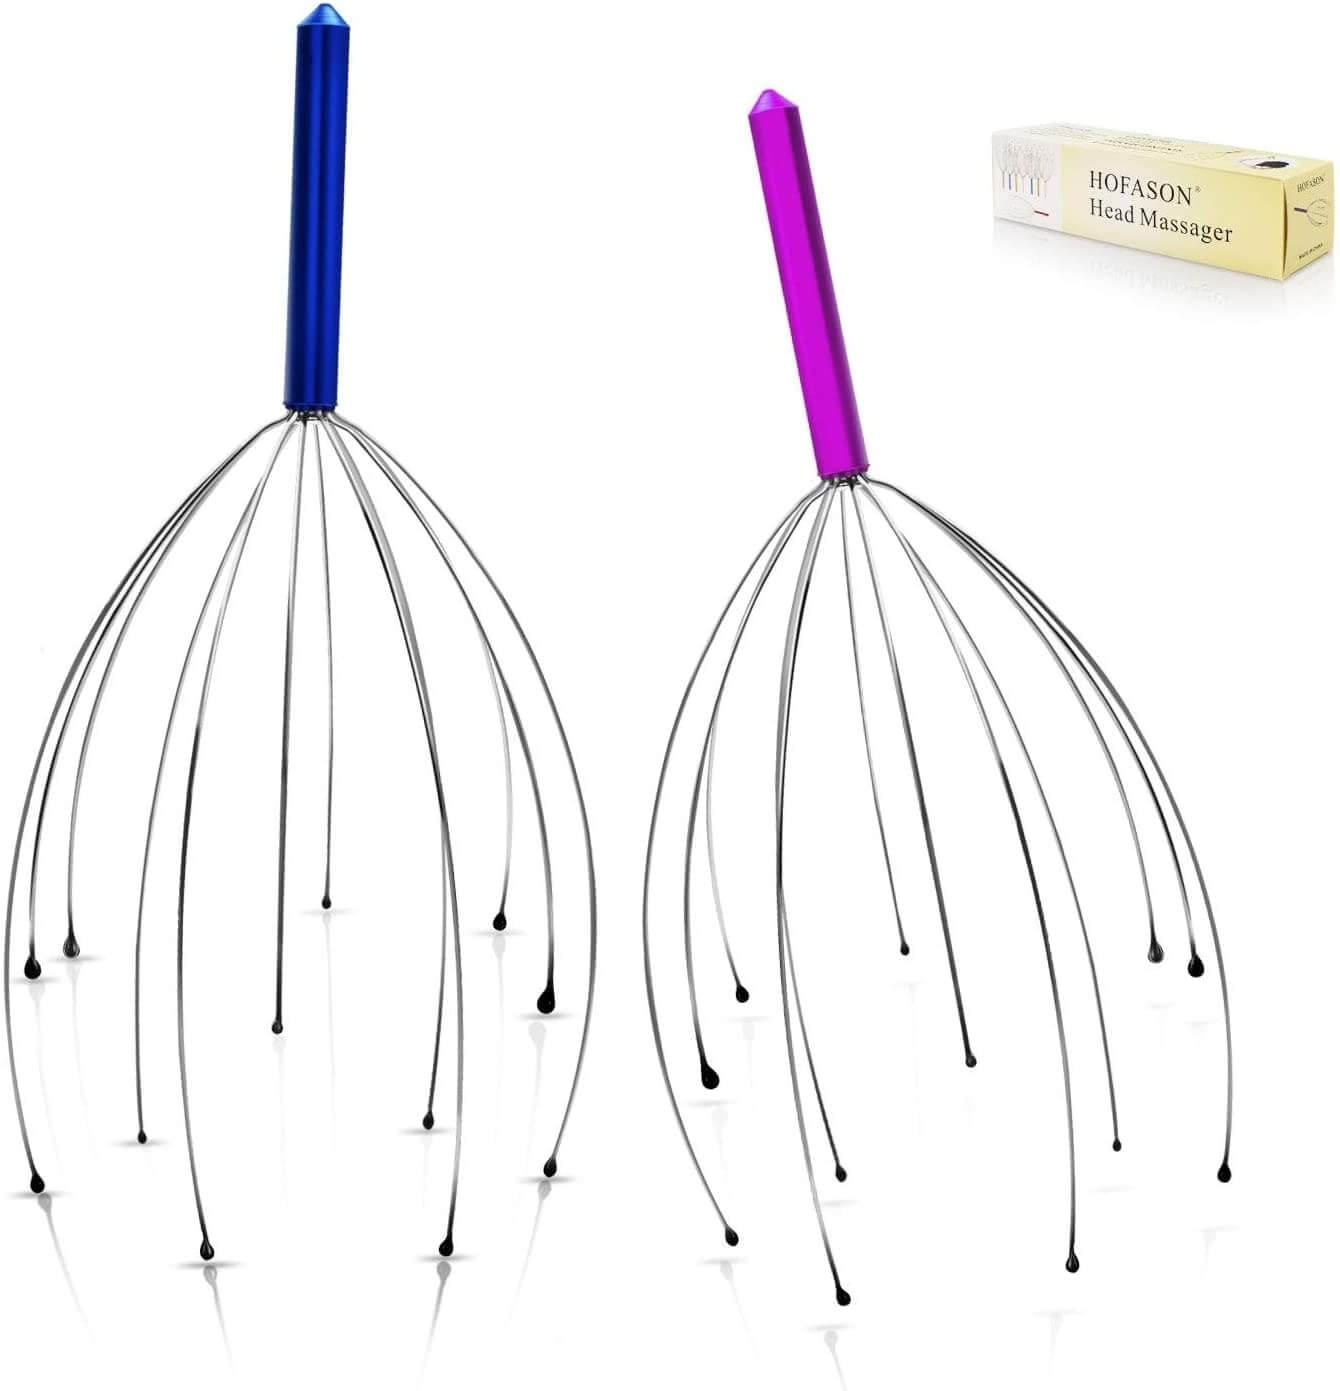 Two head massagers